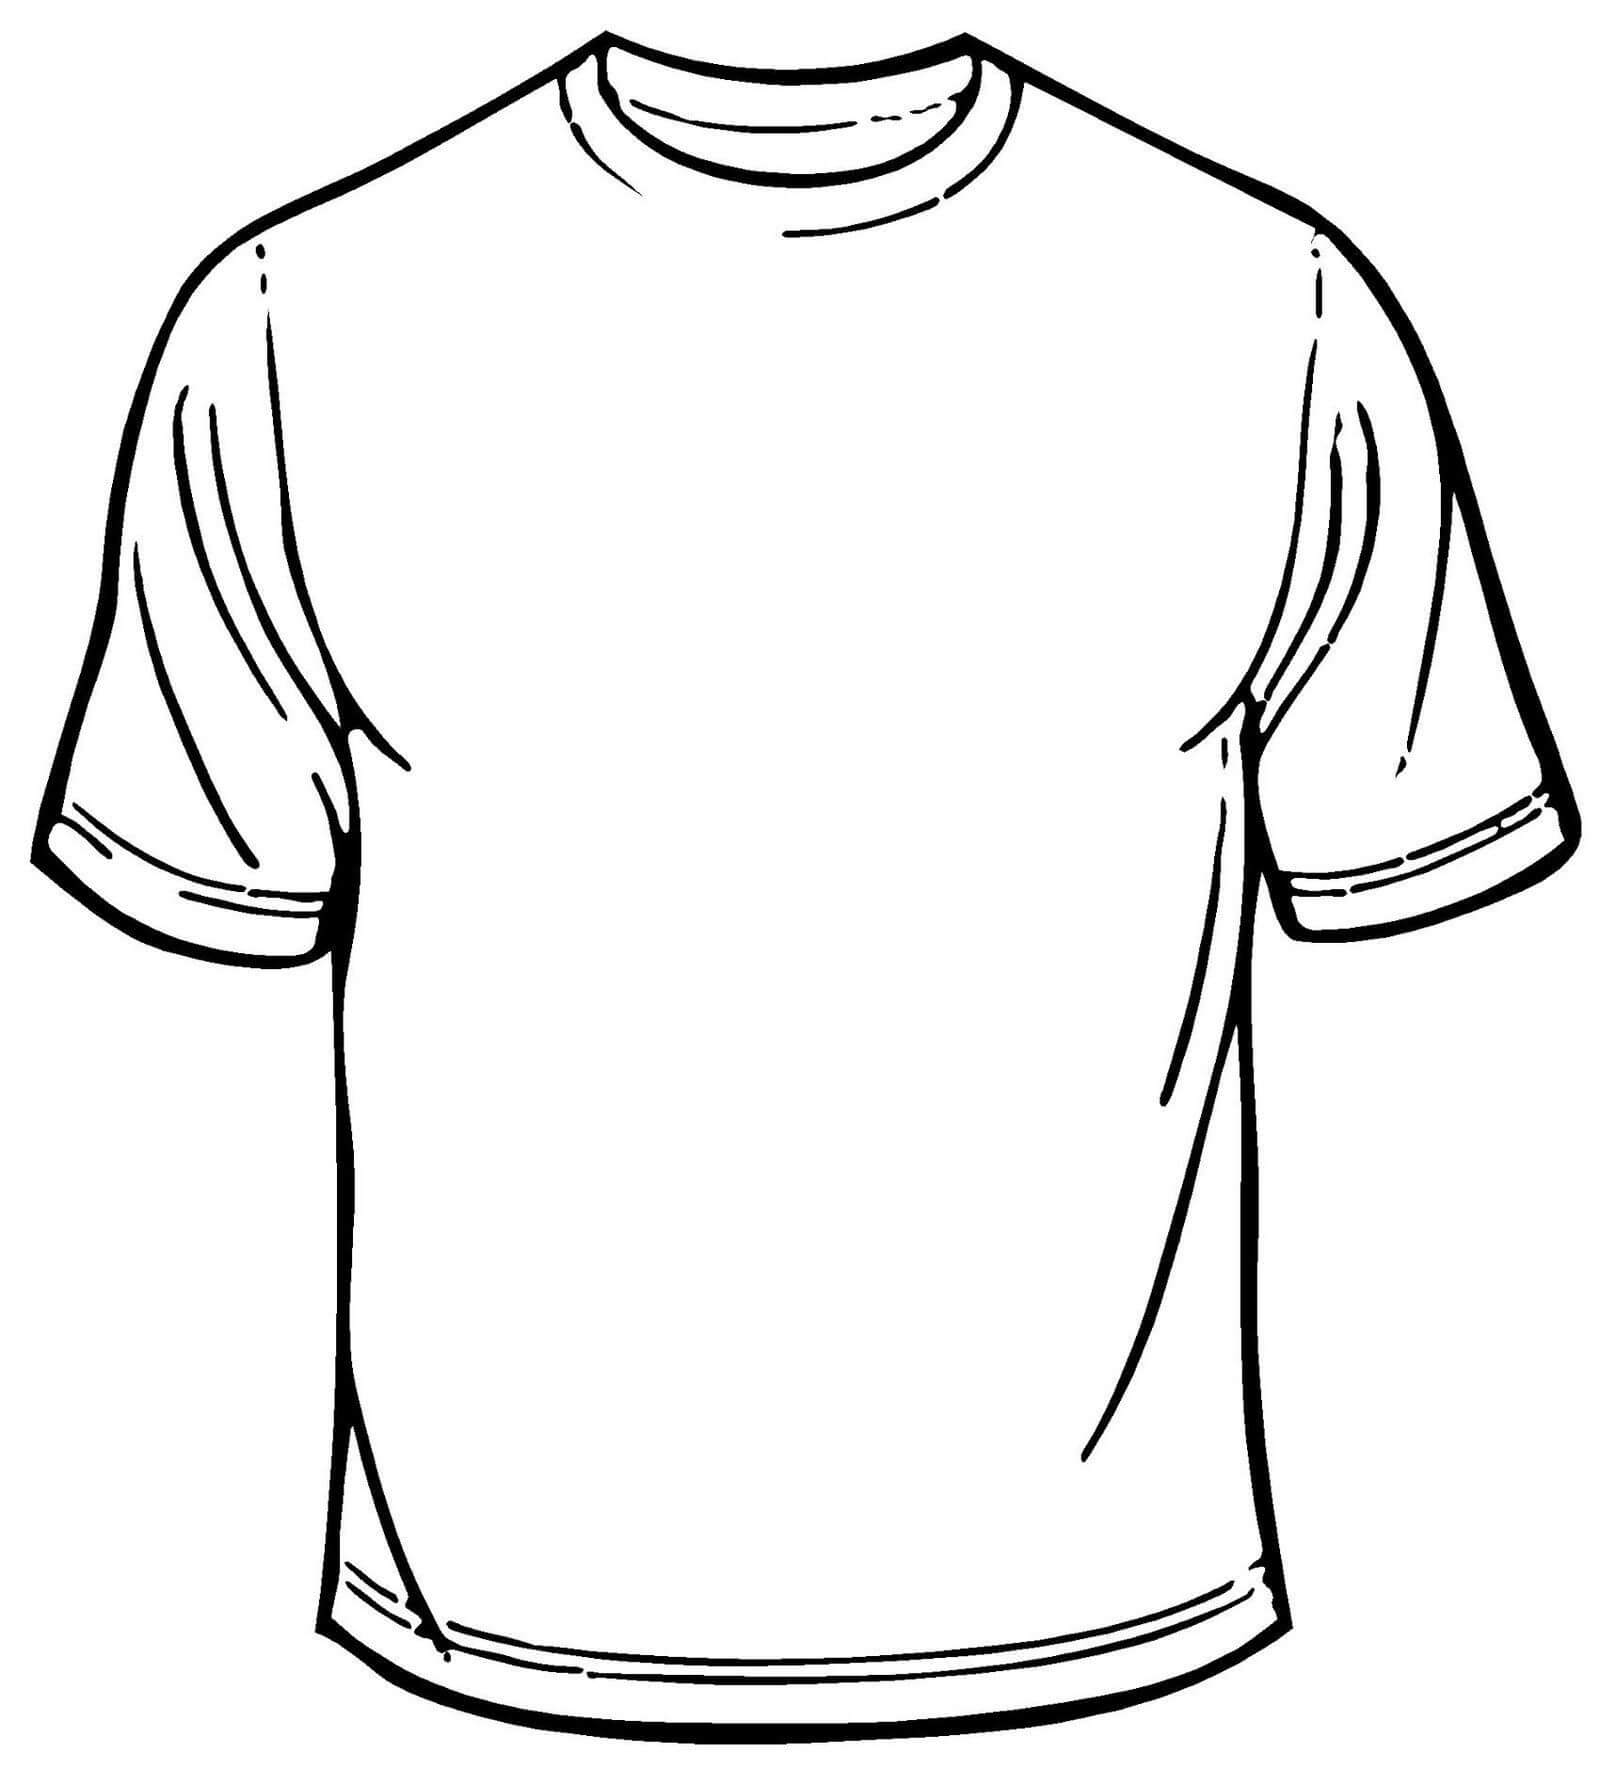 Blank T Shirt Coloring Sheet Printable Intended For Printable Blank Tshirt Template